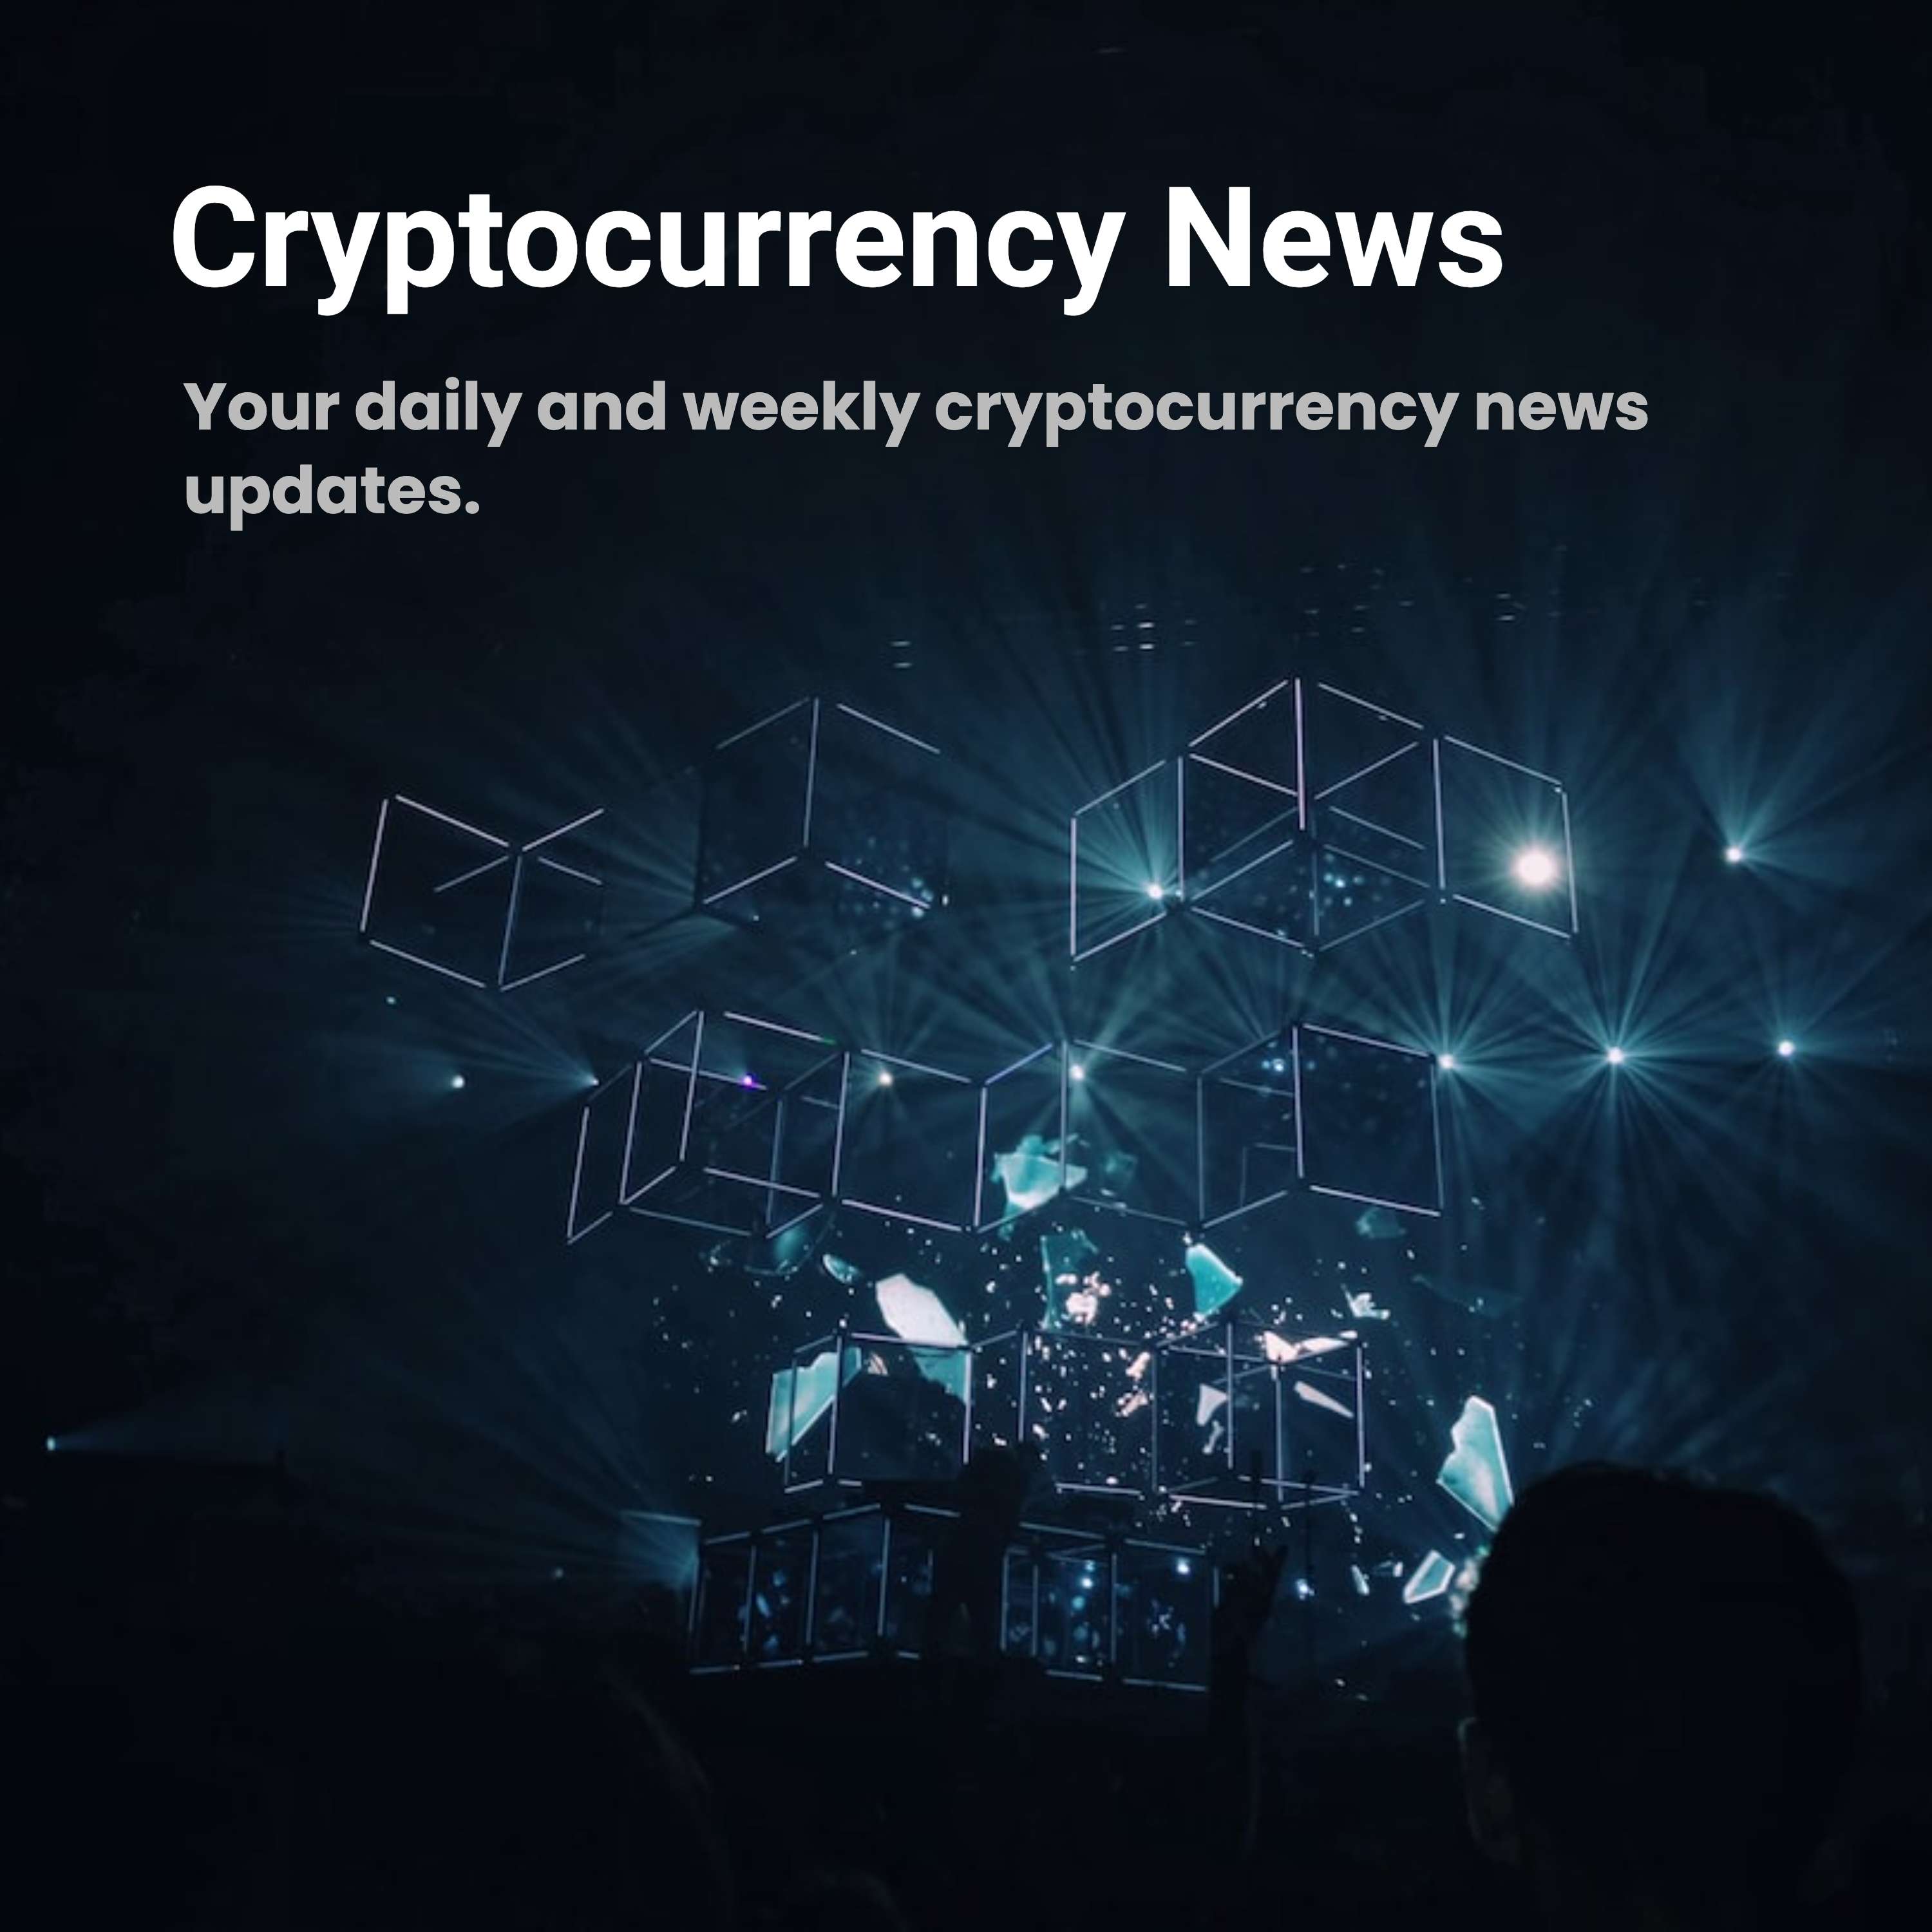 Daily Cryptocurrency News